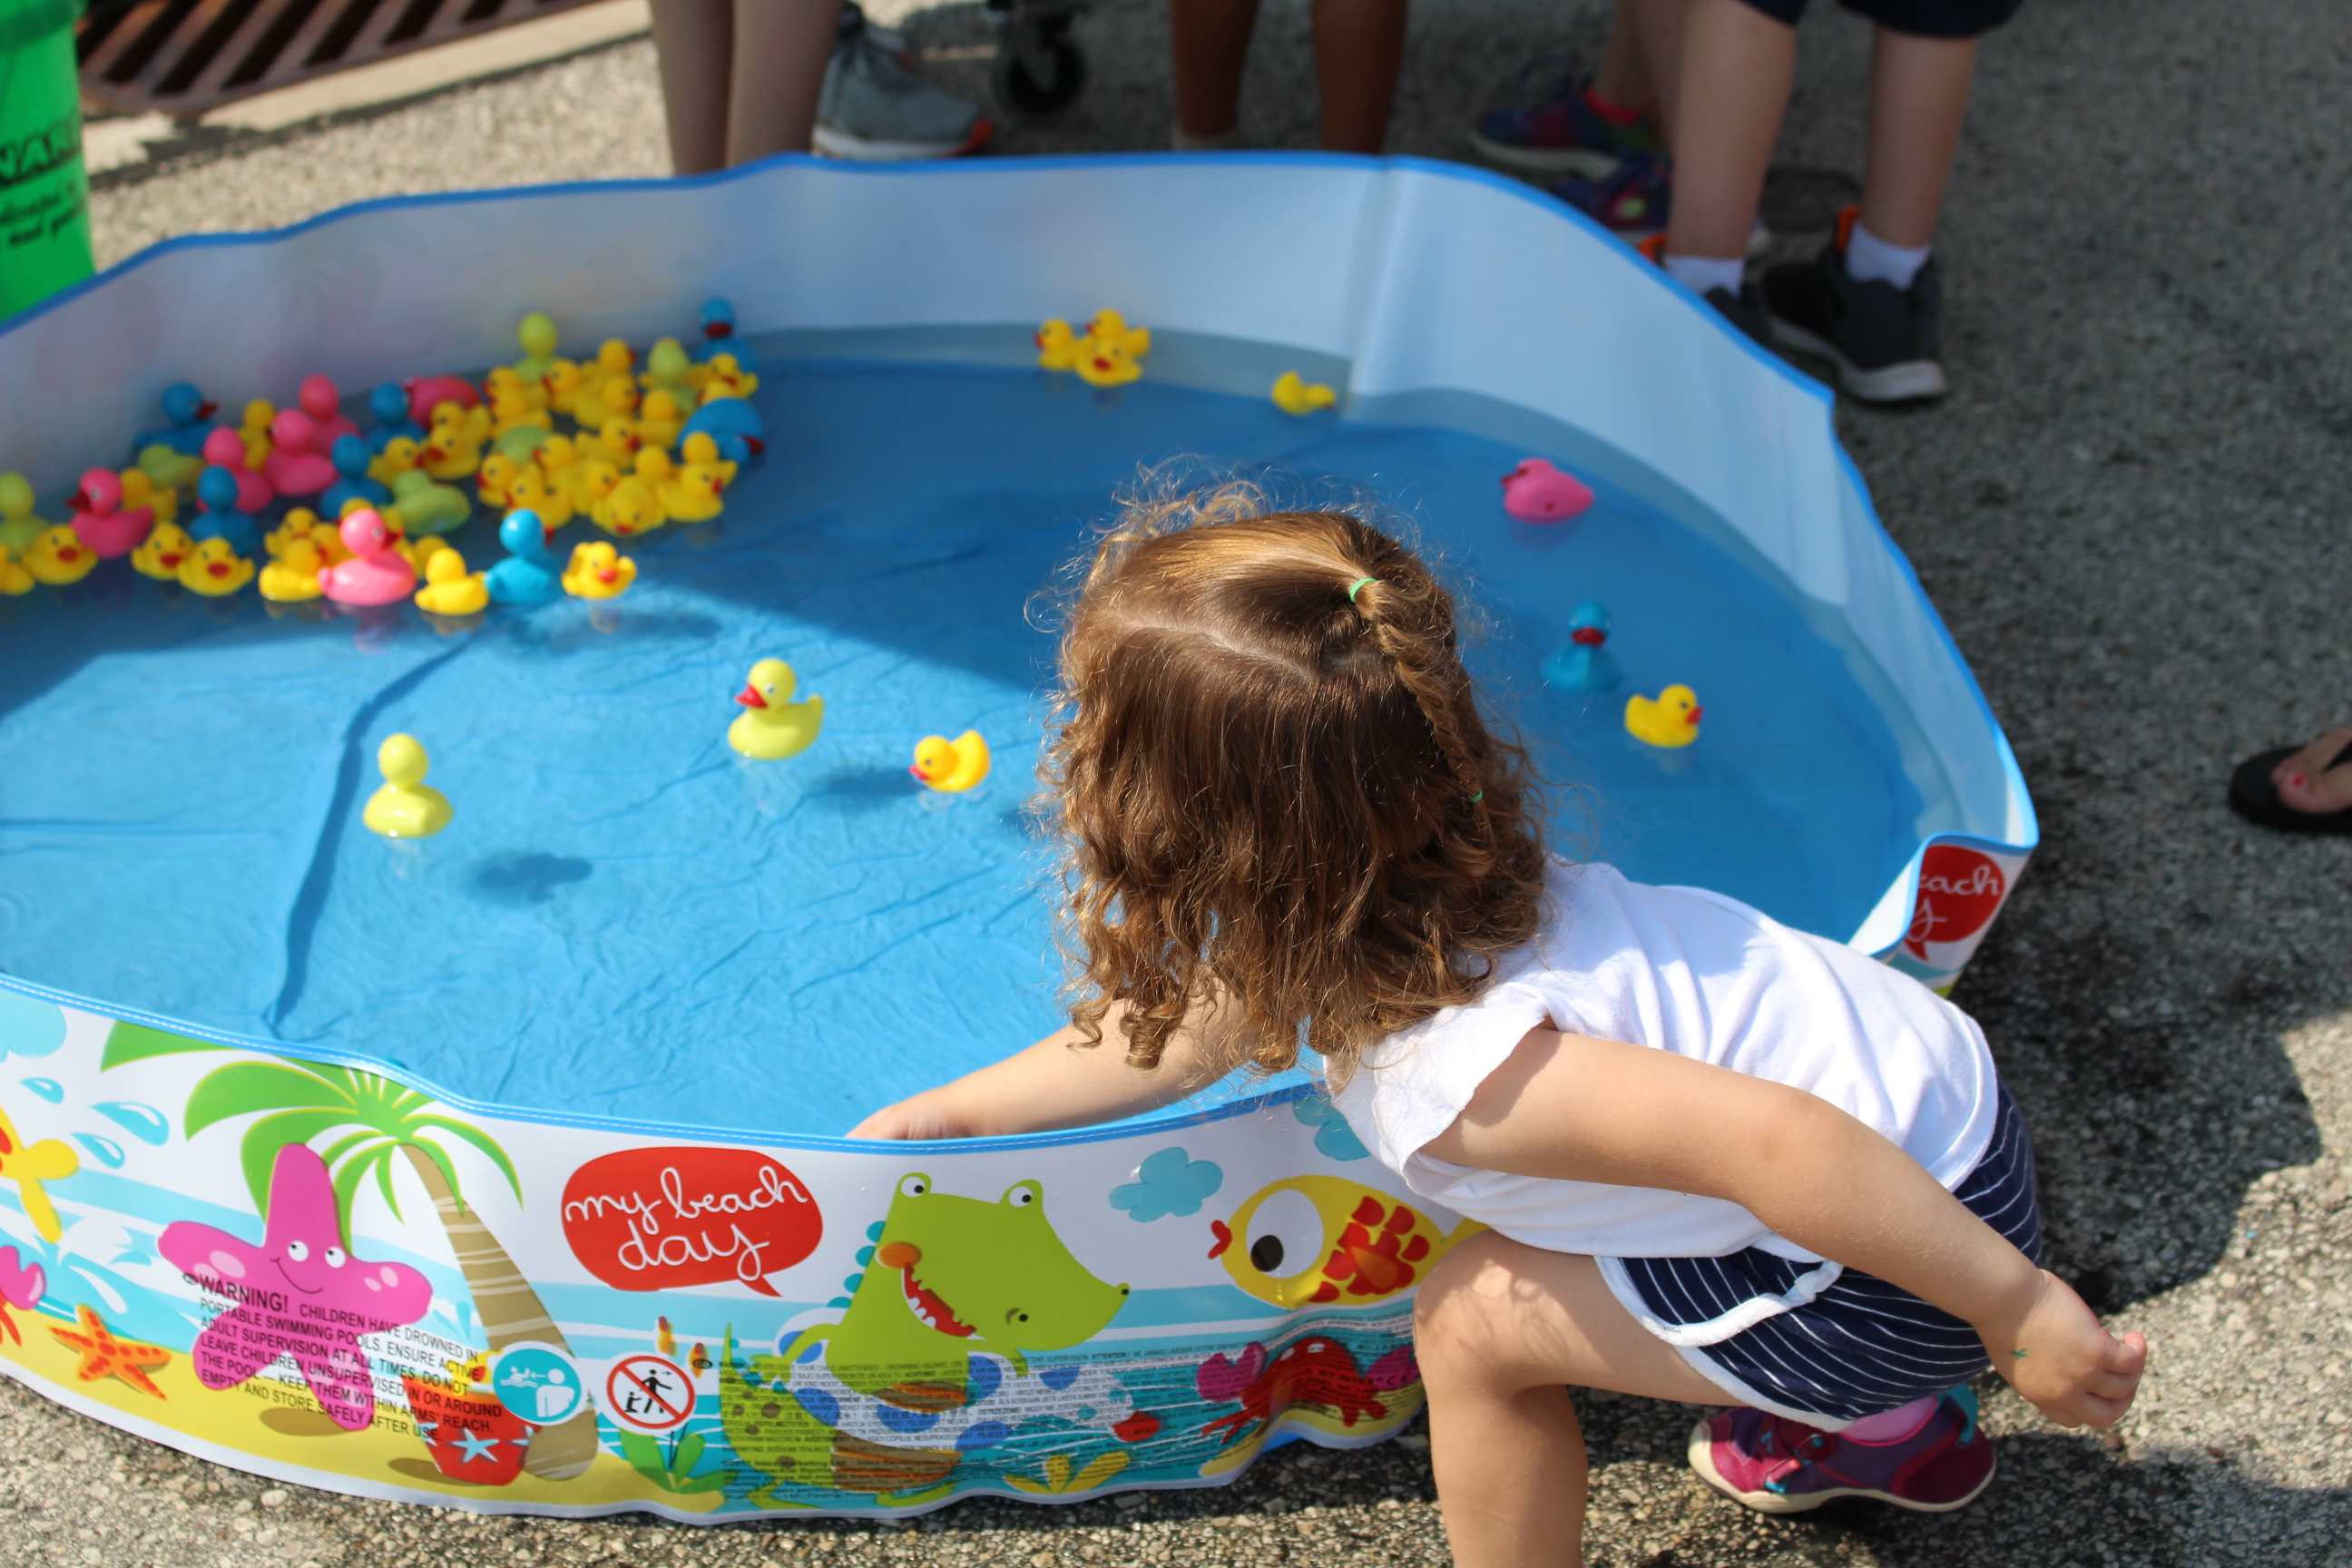 Child playing game with rubber ducks in small pool